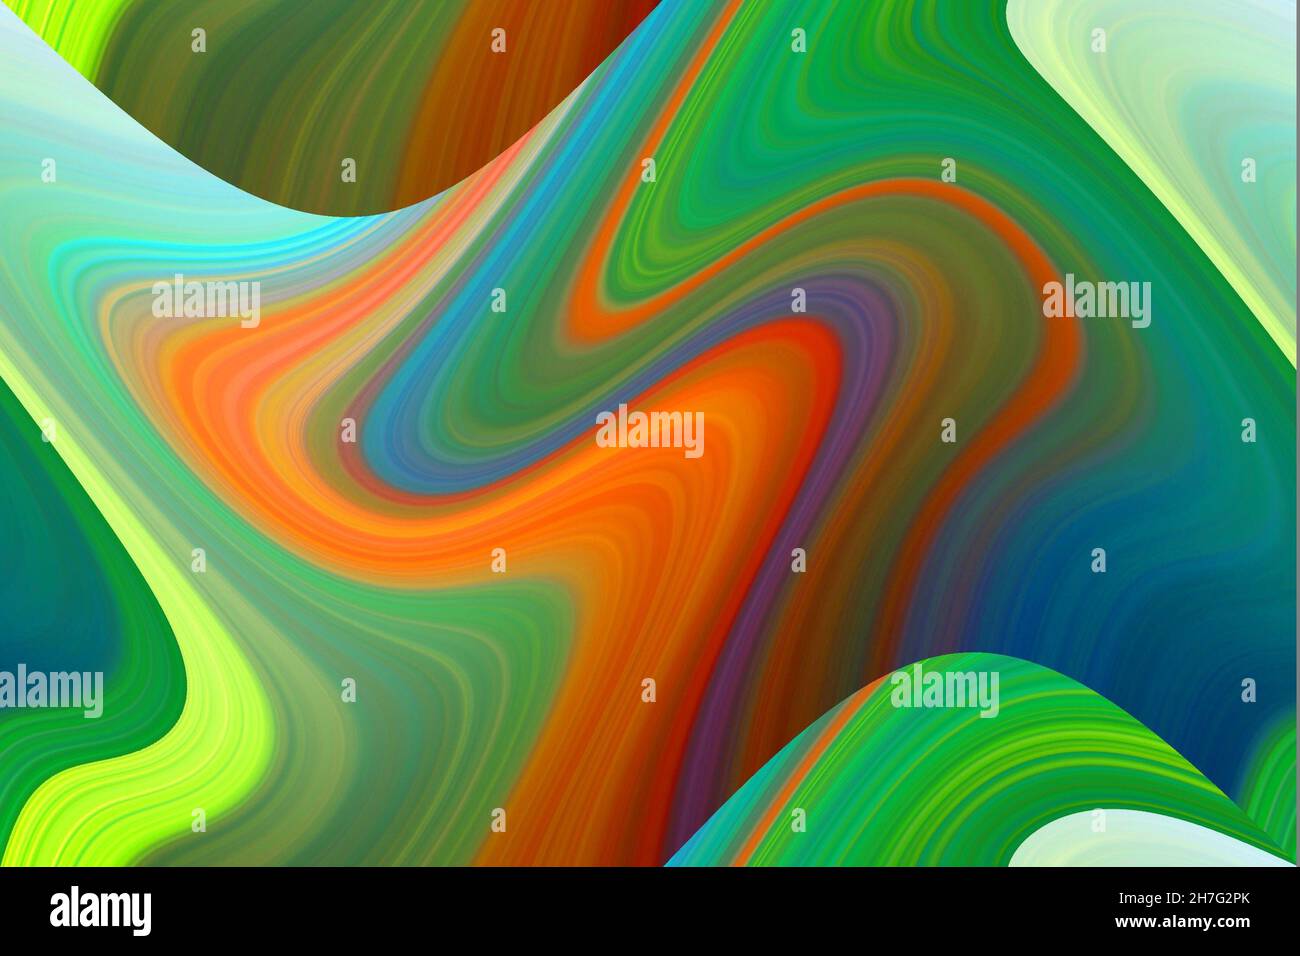 colorful vivid abstract seamless background, wave texture Stock Photo